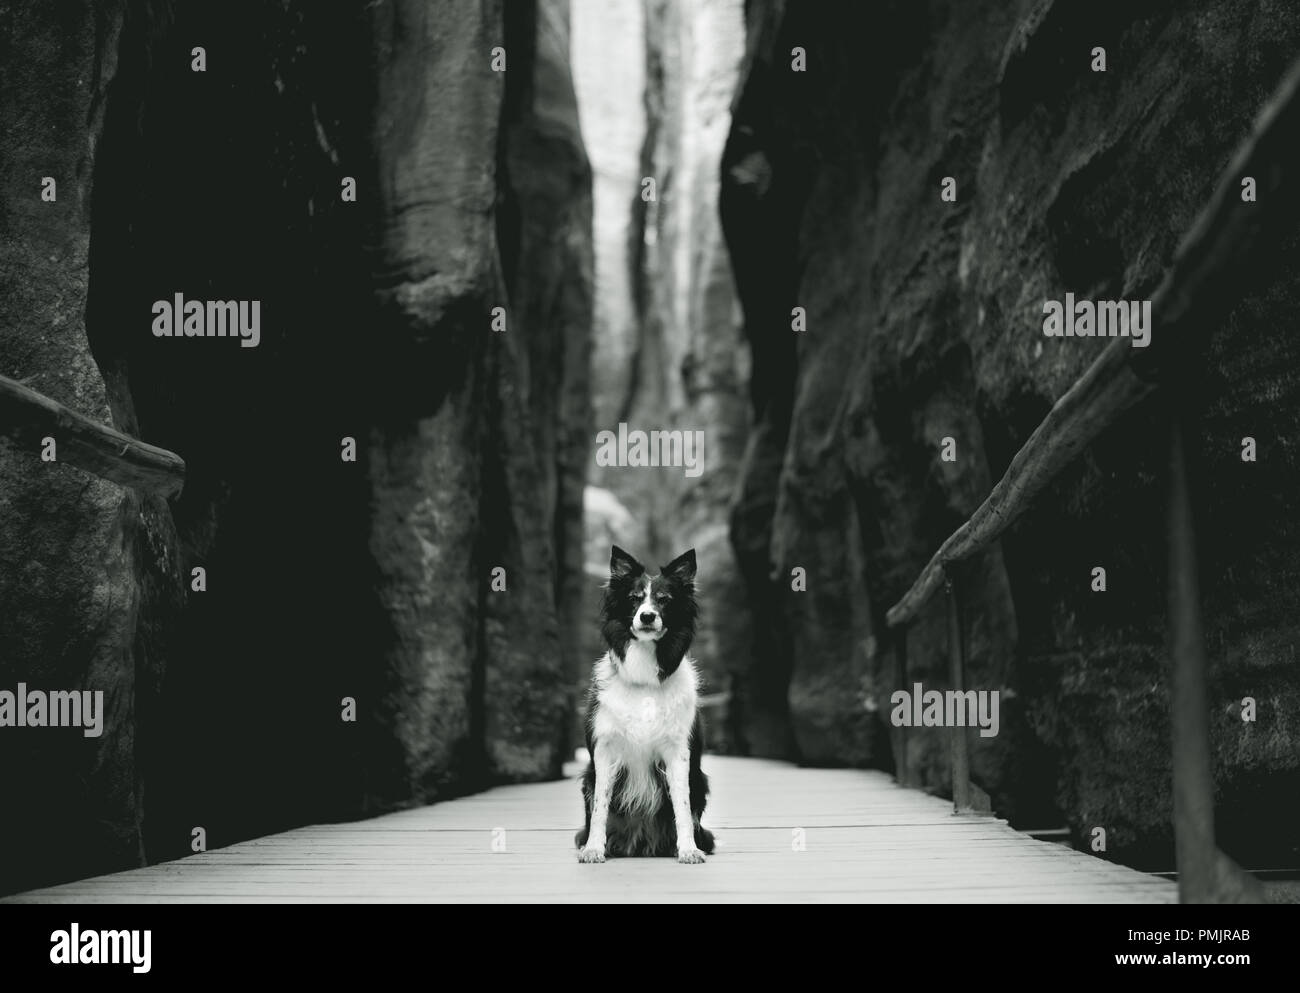 Black and White Portrait Dog Sitting on the Wooden Walkway between High Rocks. Black and White Border Collie in Sandstones Cliffs. Stock Photo